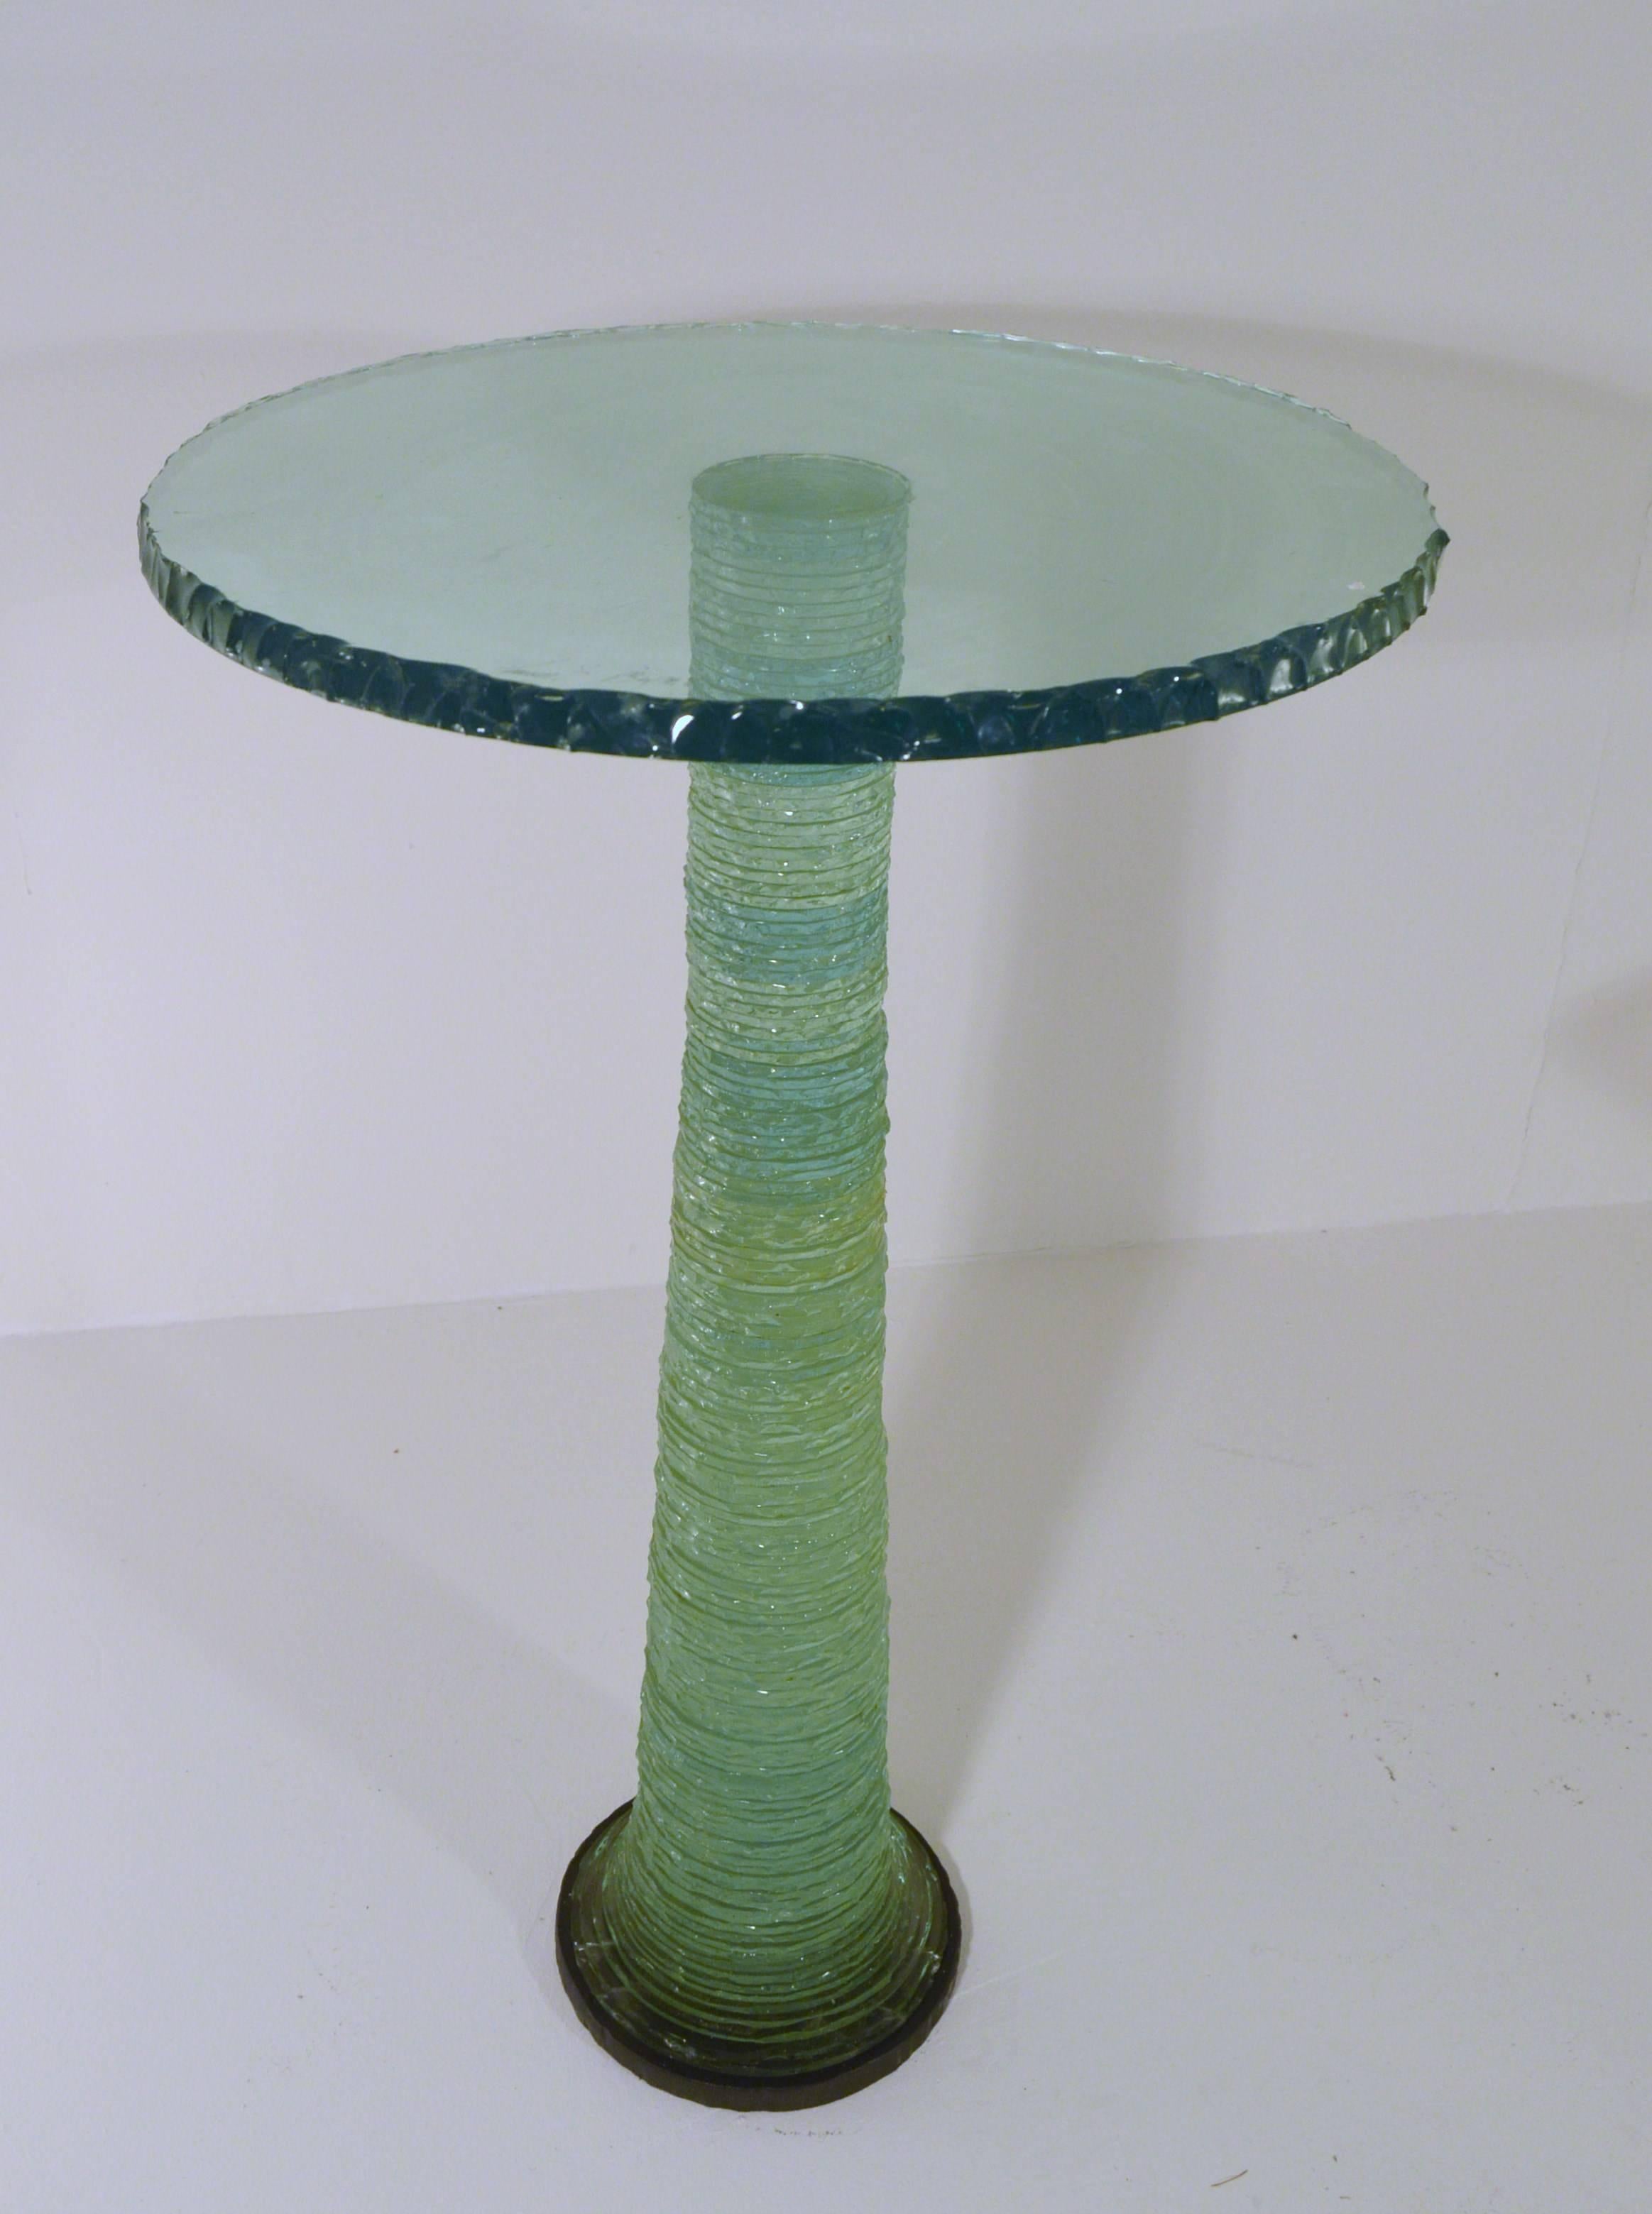 Modern Sculptural Coffee Table with Candle Stand in Glass. Signed and Dated 1992